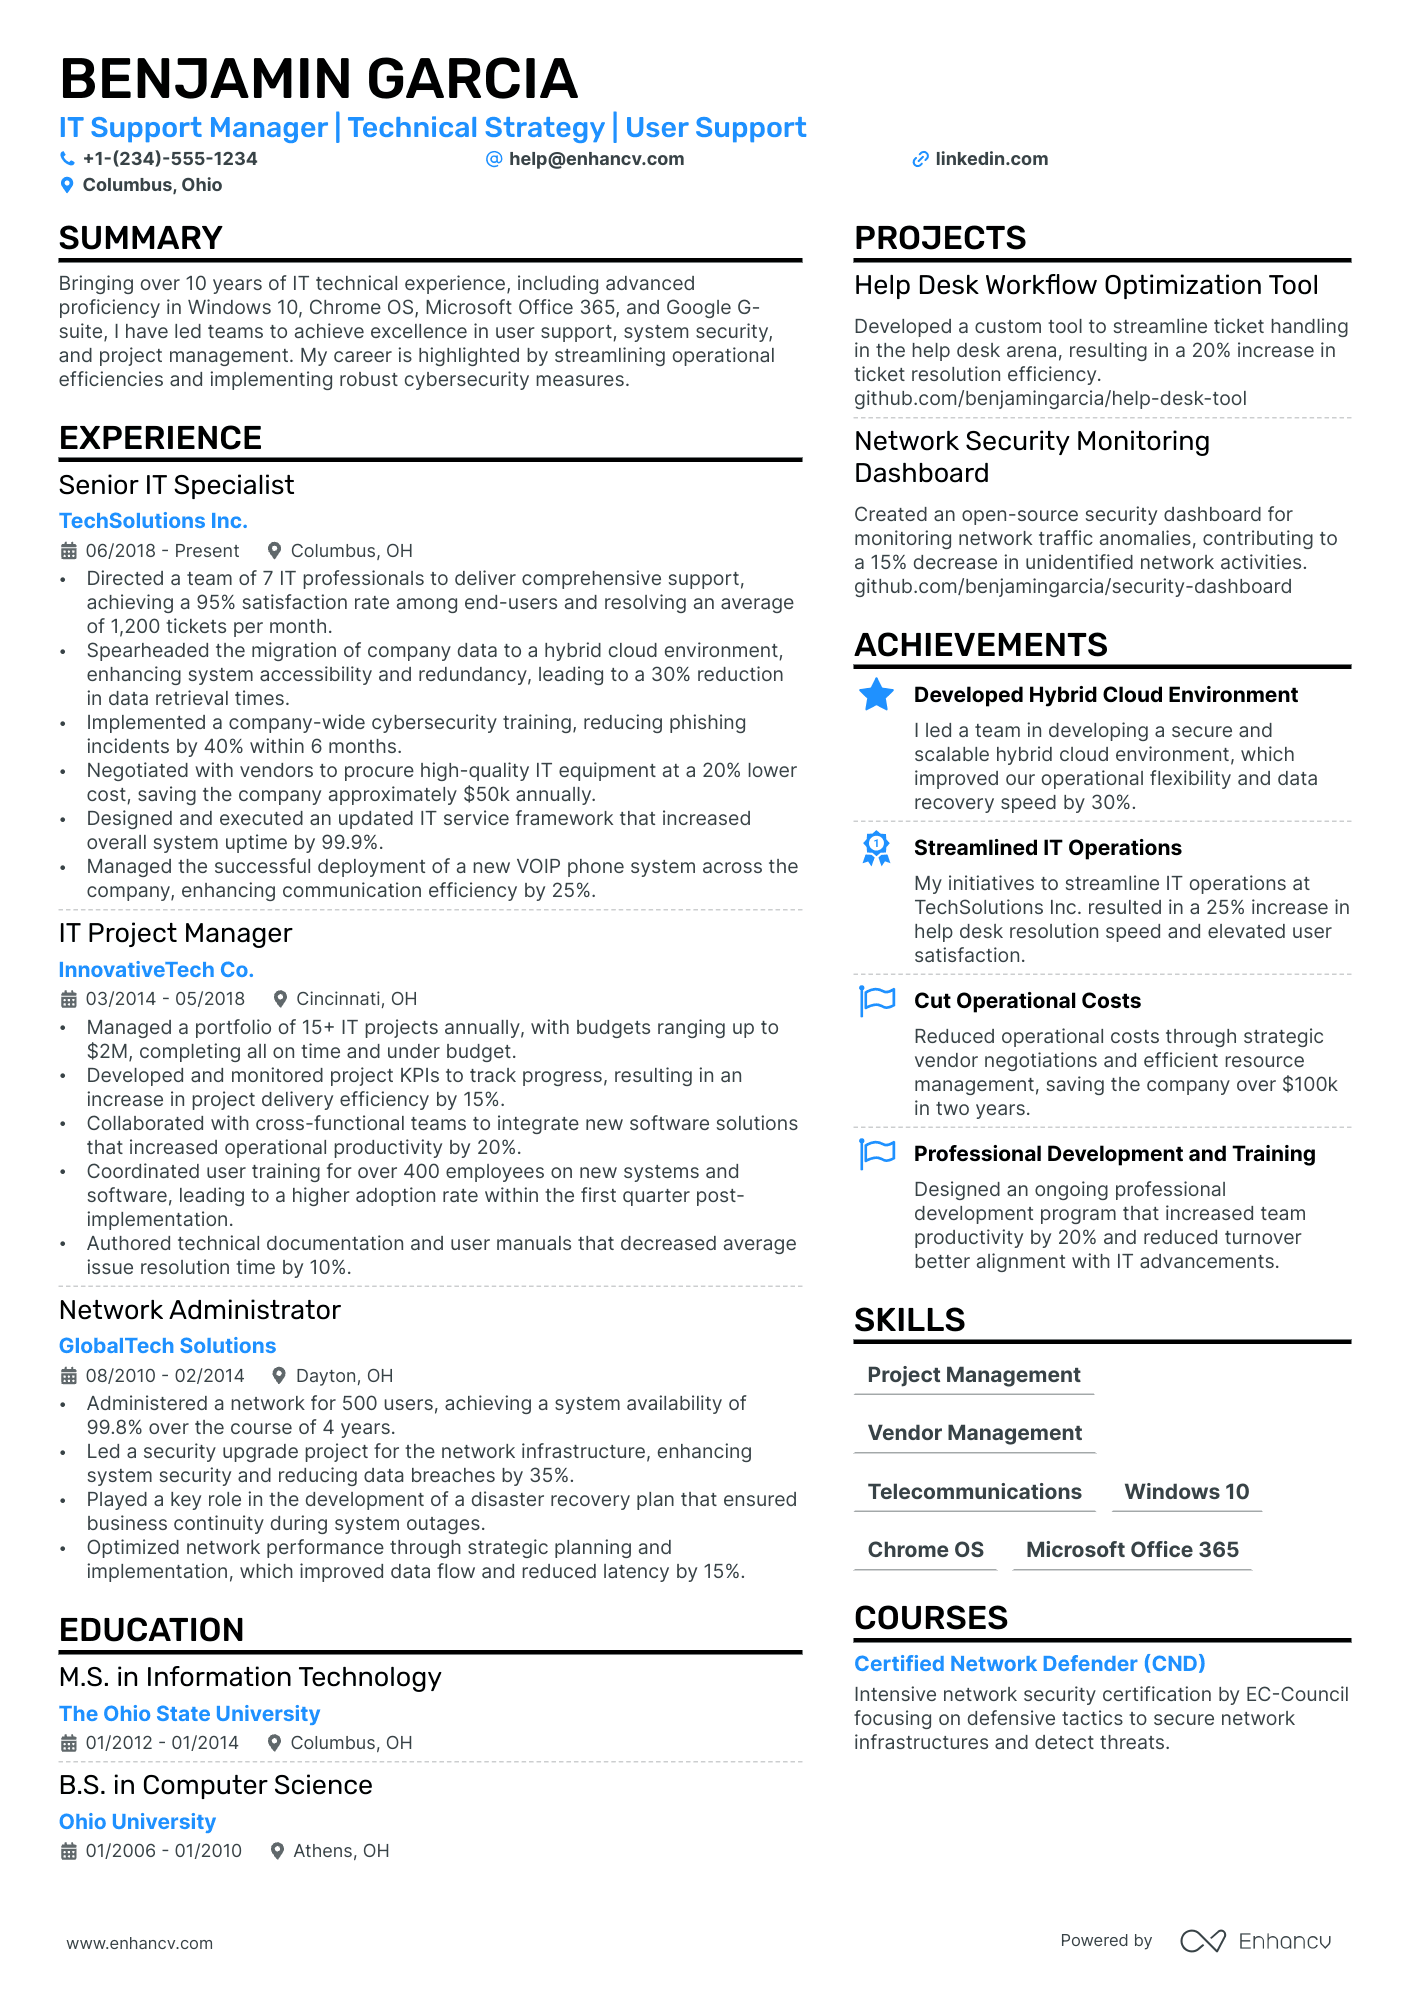 IT Support Manager resume example